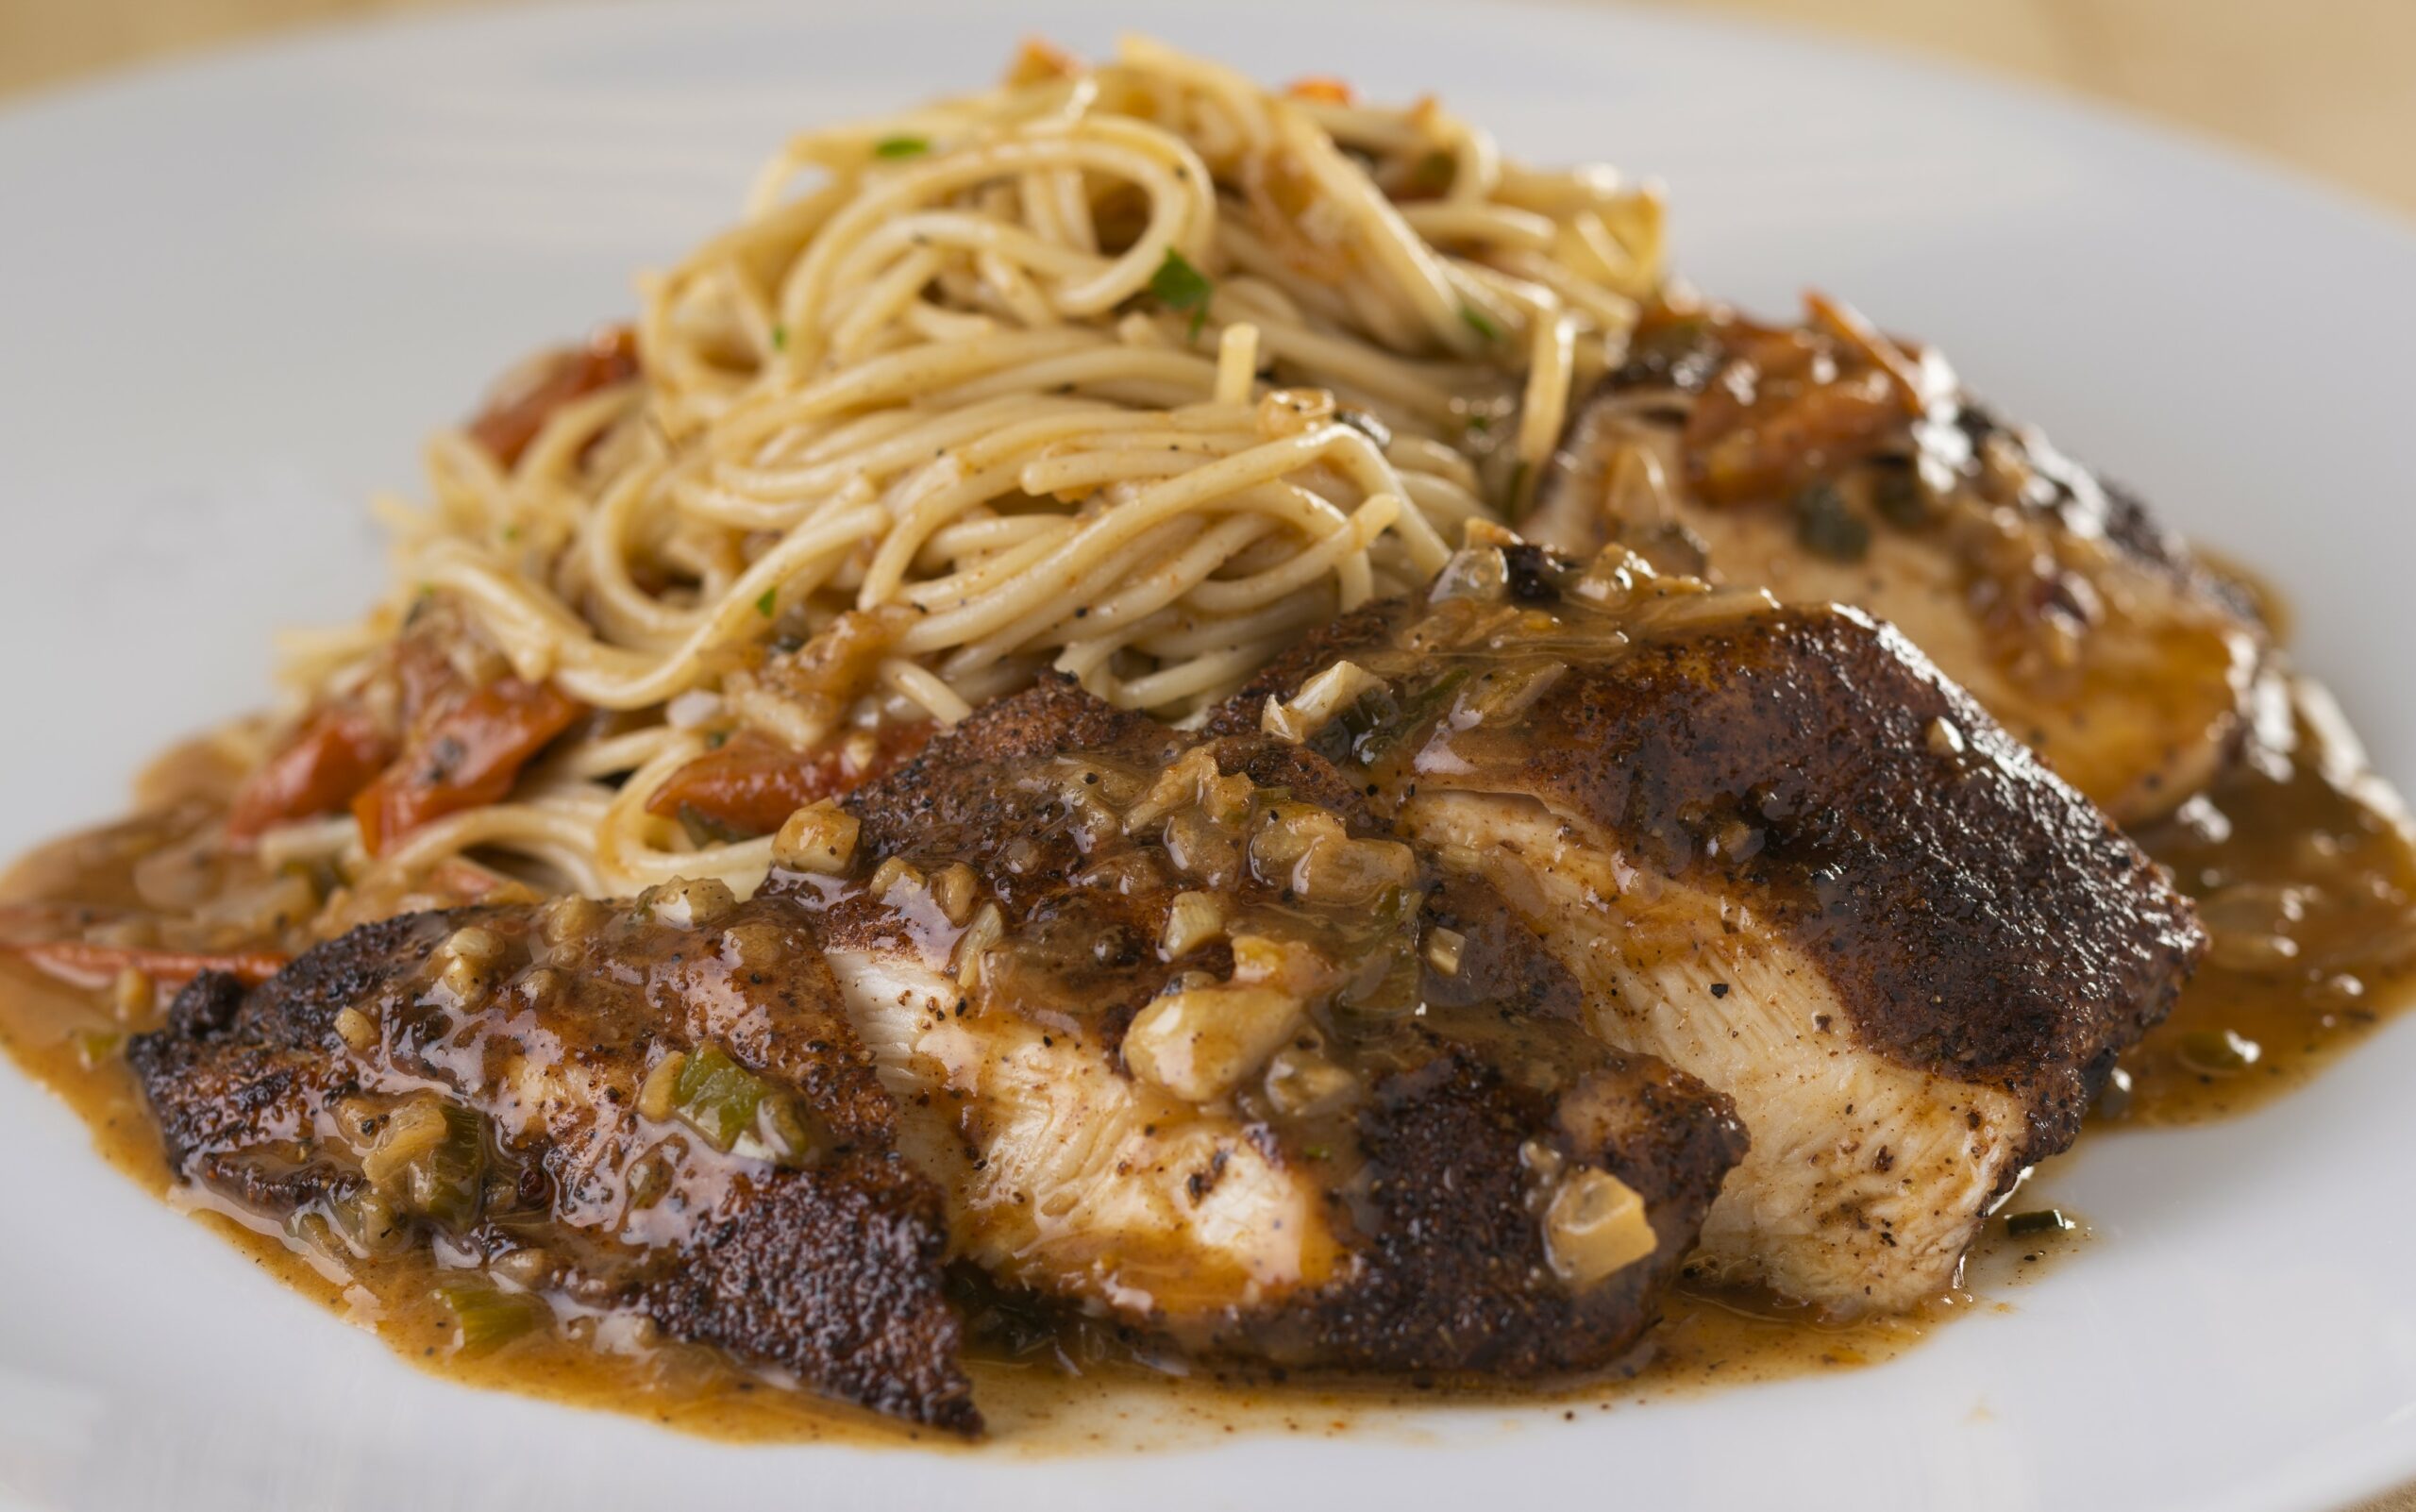 a close up of jerk chicken with tomato garlic butter sauce and some noodles